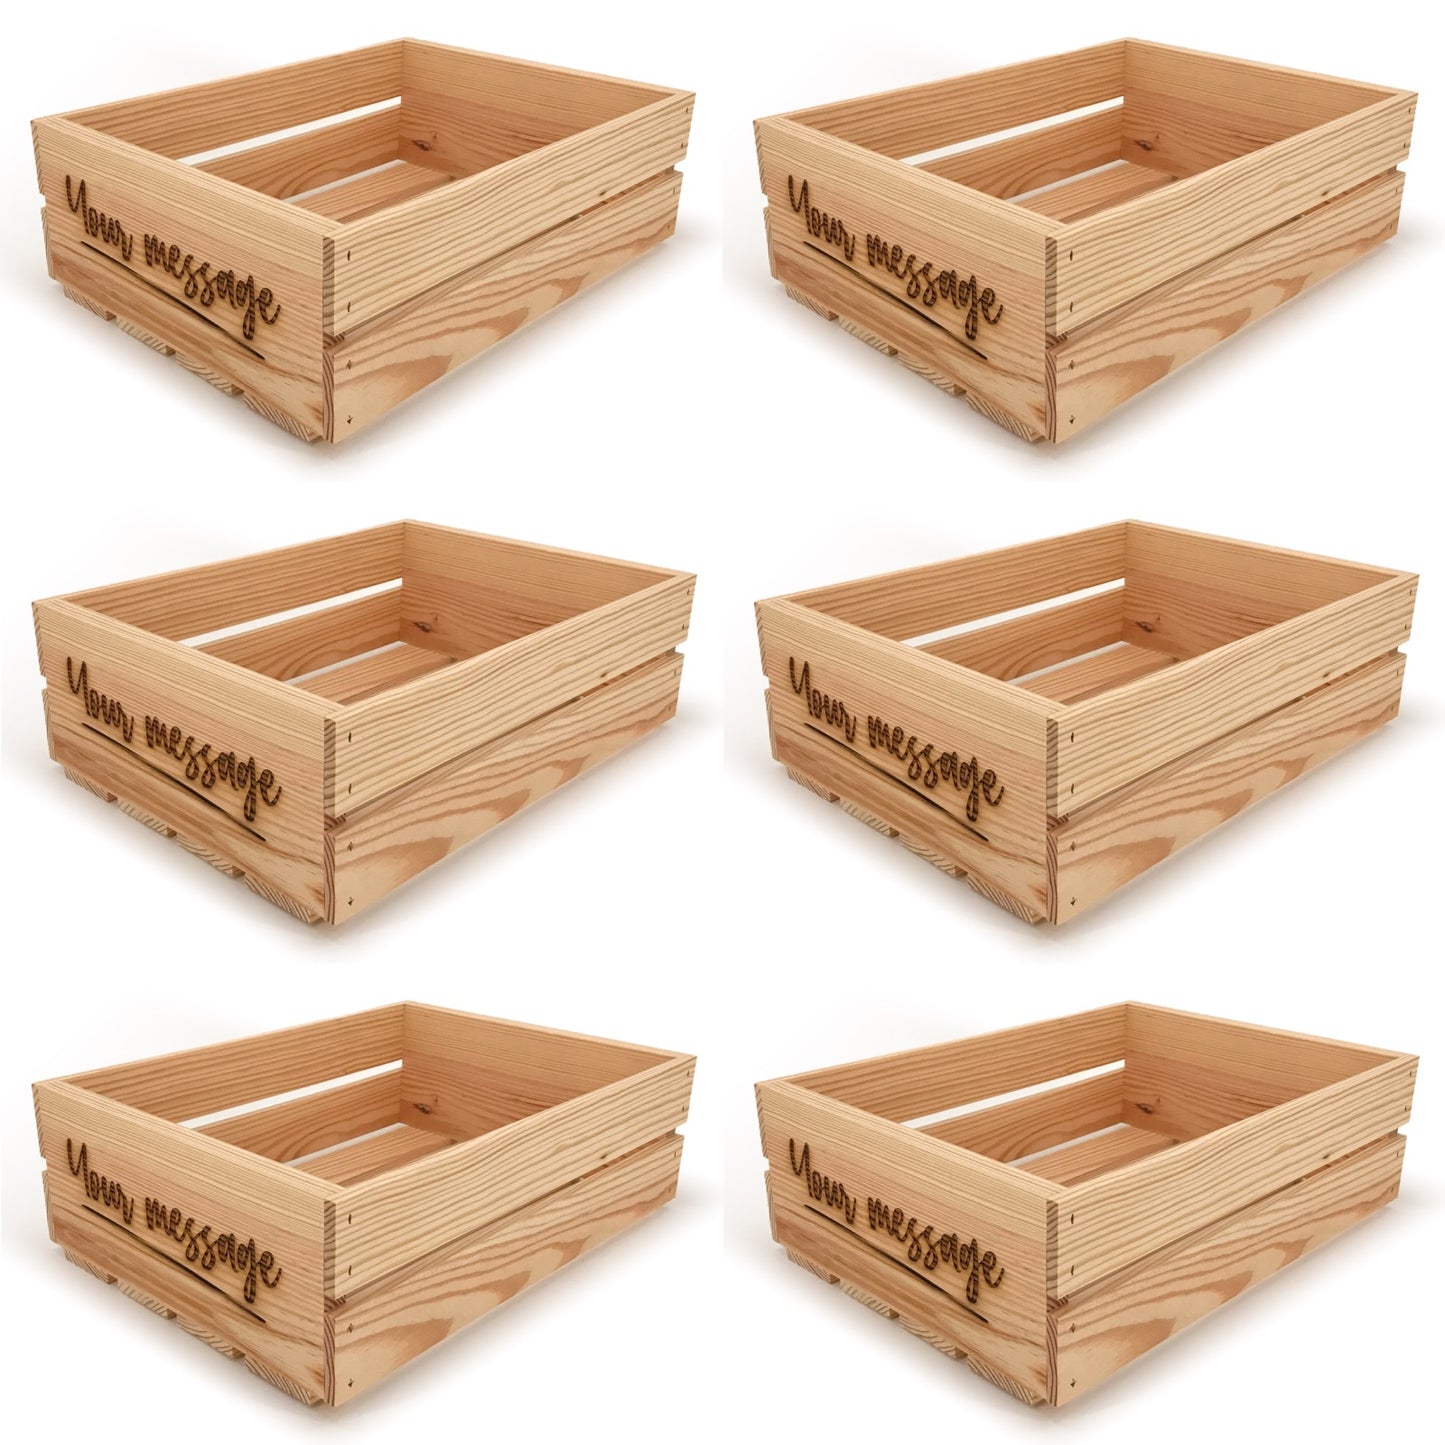 6 Small wooden crates with custom message 16x12x5.25, 6-WS-16-12-5.25-ST-NW-NL, 12-WS-16-12-5.25-ST-NW-NL, 24-WS-16-12-5.25-ST-NW-NL, 48-WS-16-12-5.25-ST-NW-NL, 96-WS-16-12-5.25-ST-NW-NL